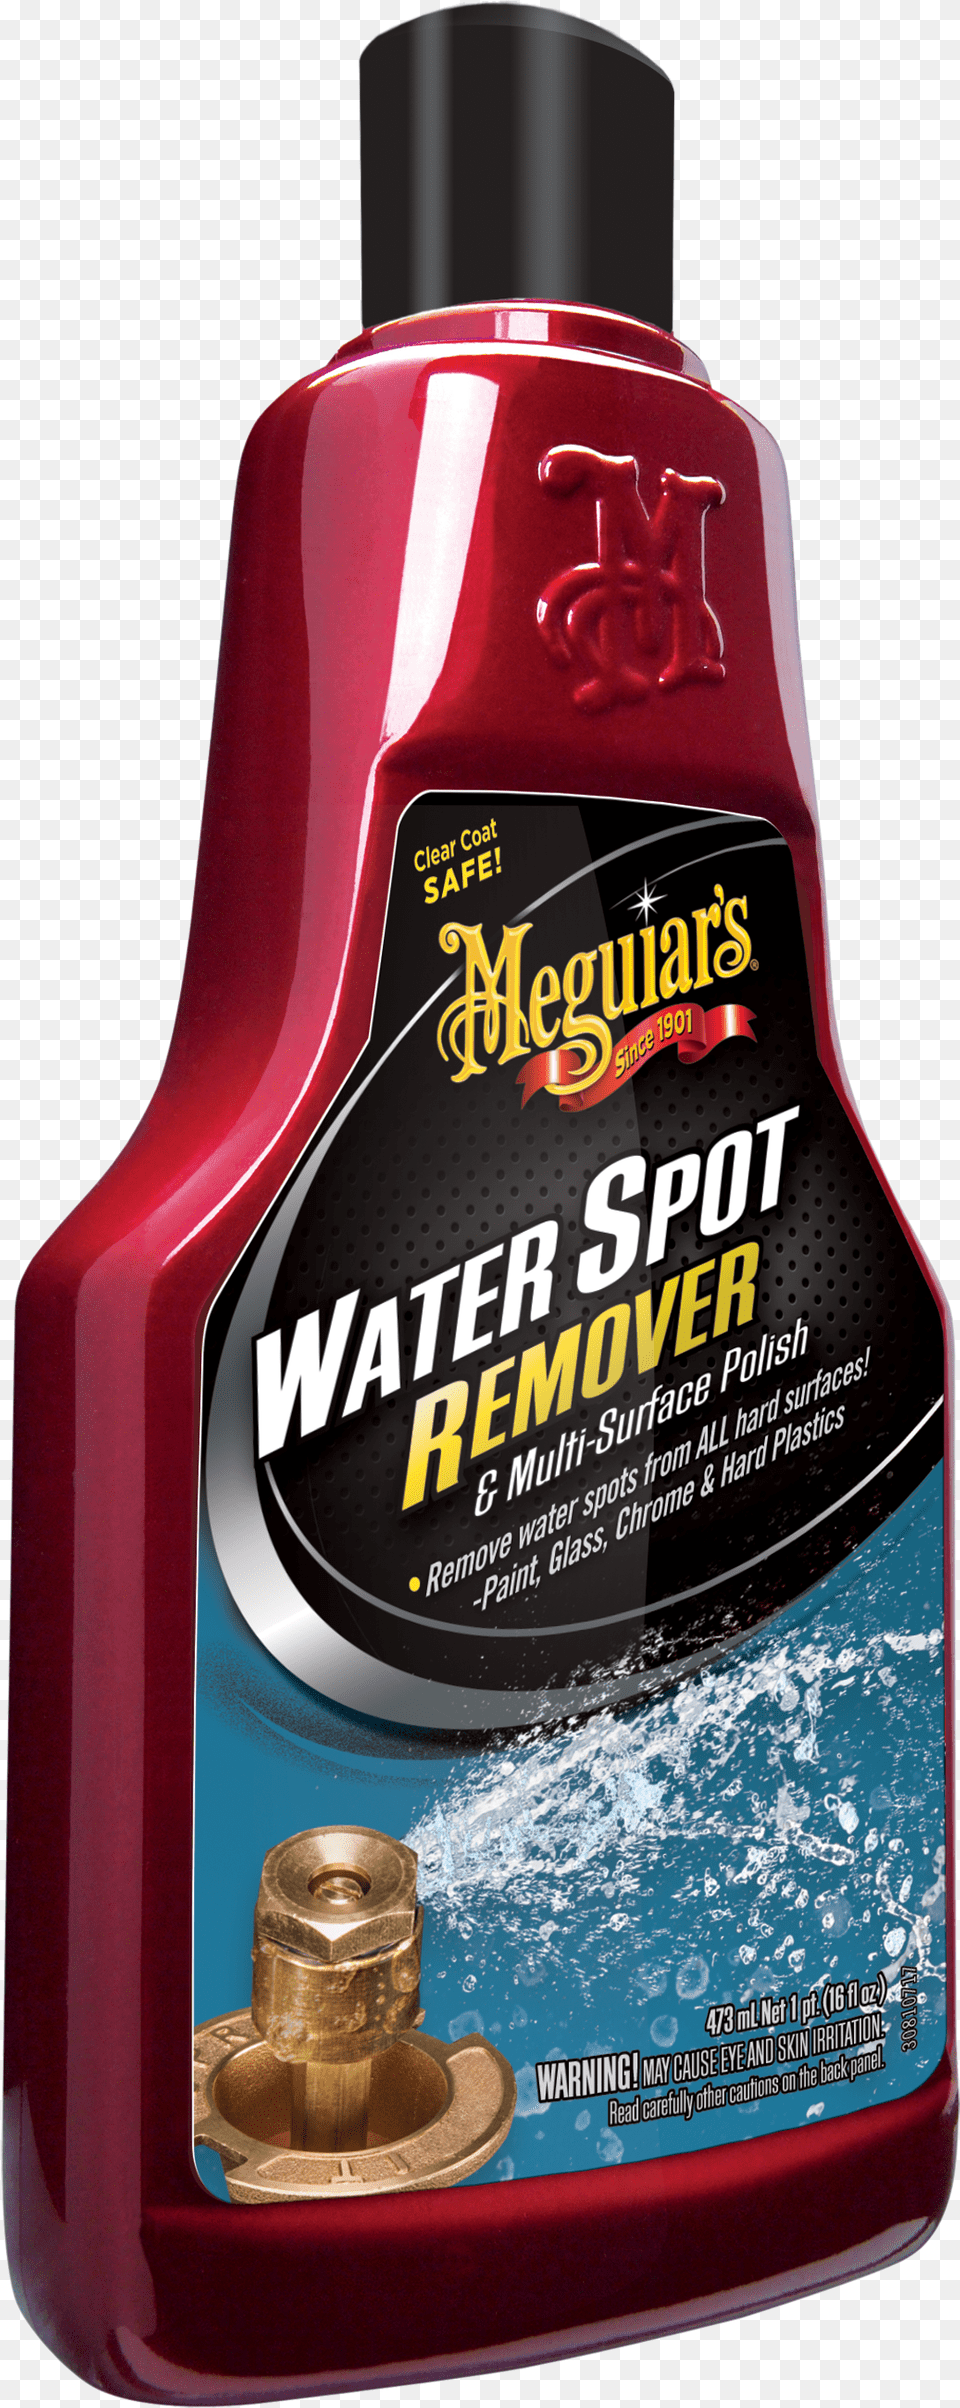 Water Spot Remover Meguiars Water Spot Remover, Food, Ketchup, Bottle Png Image